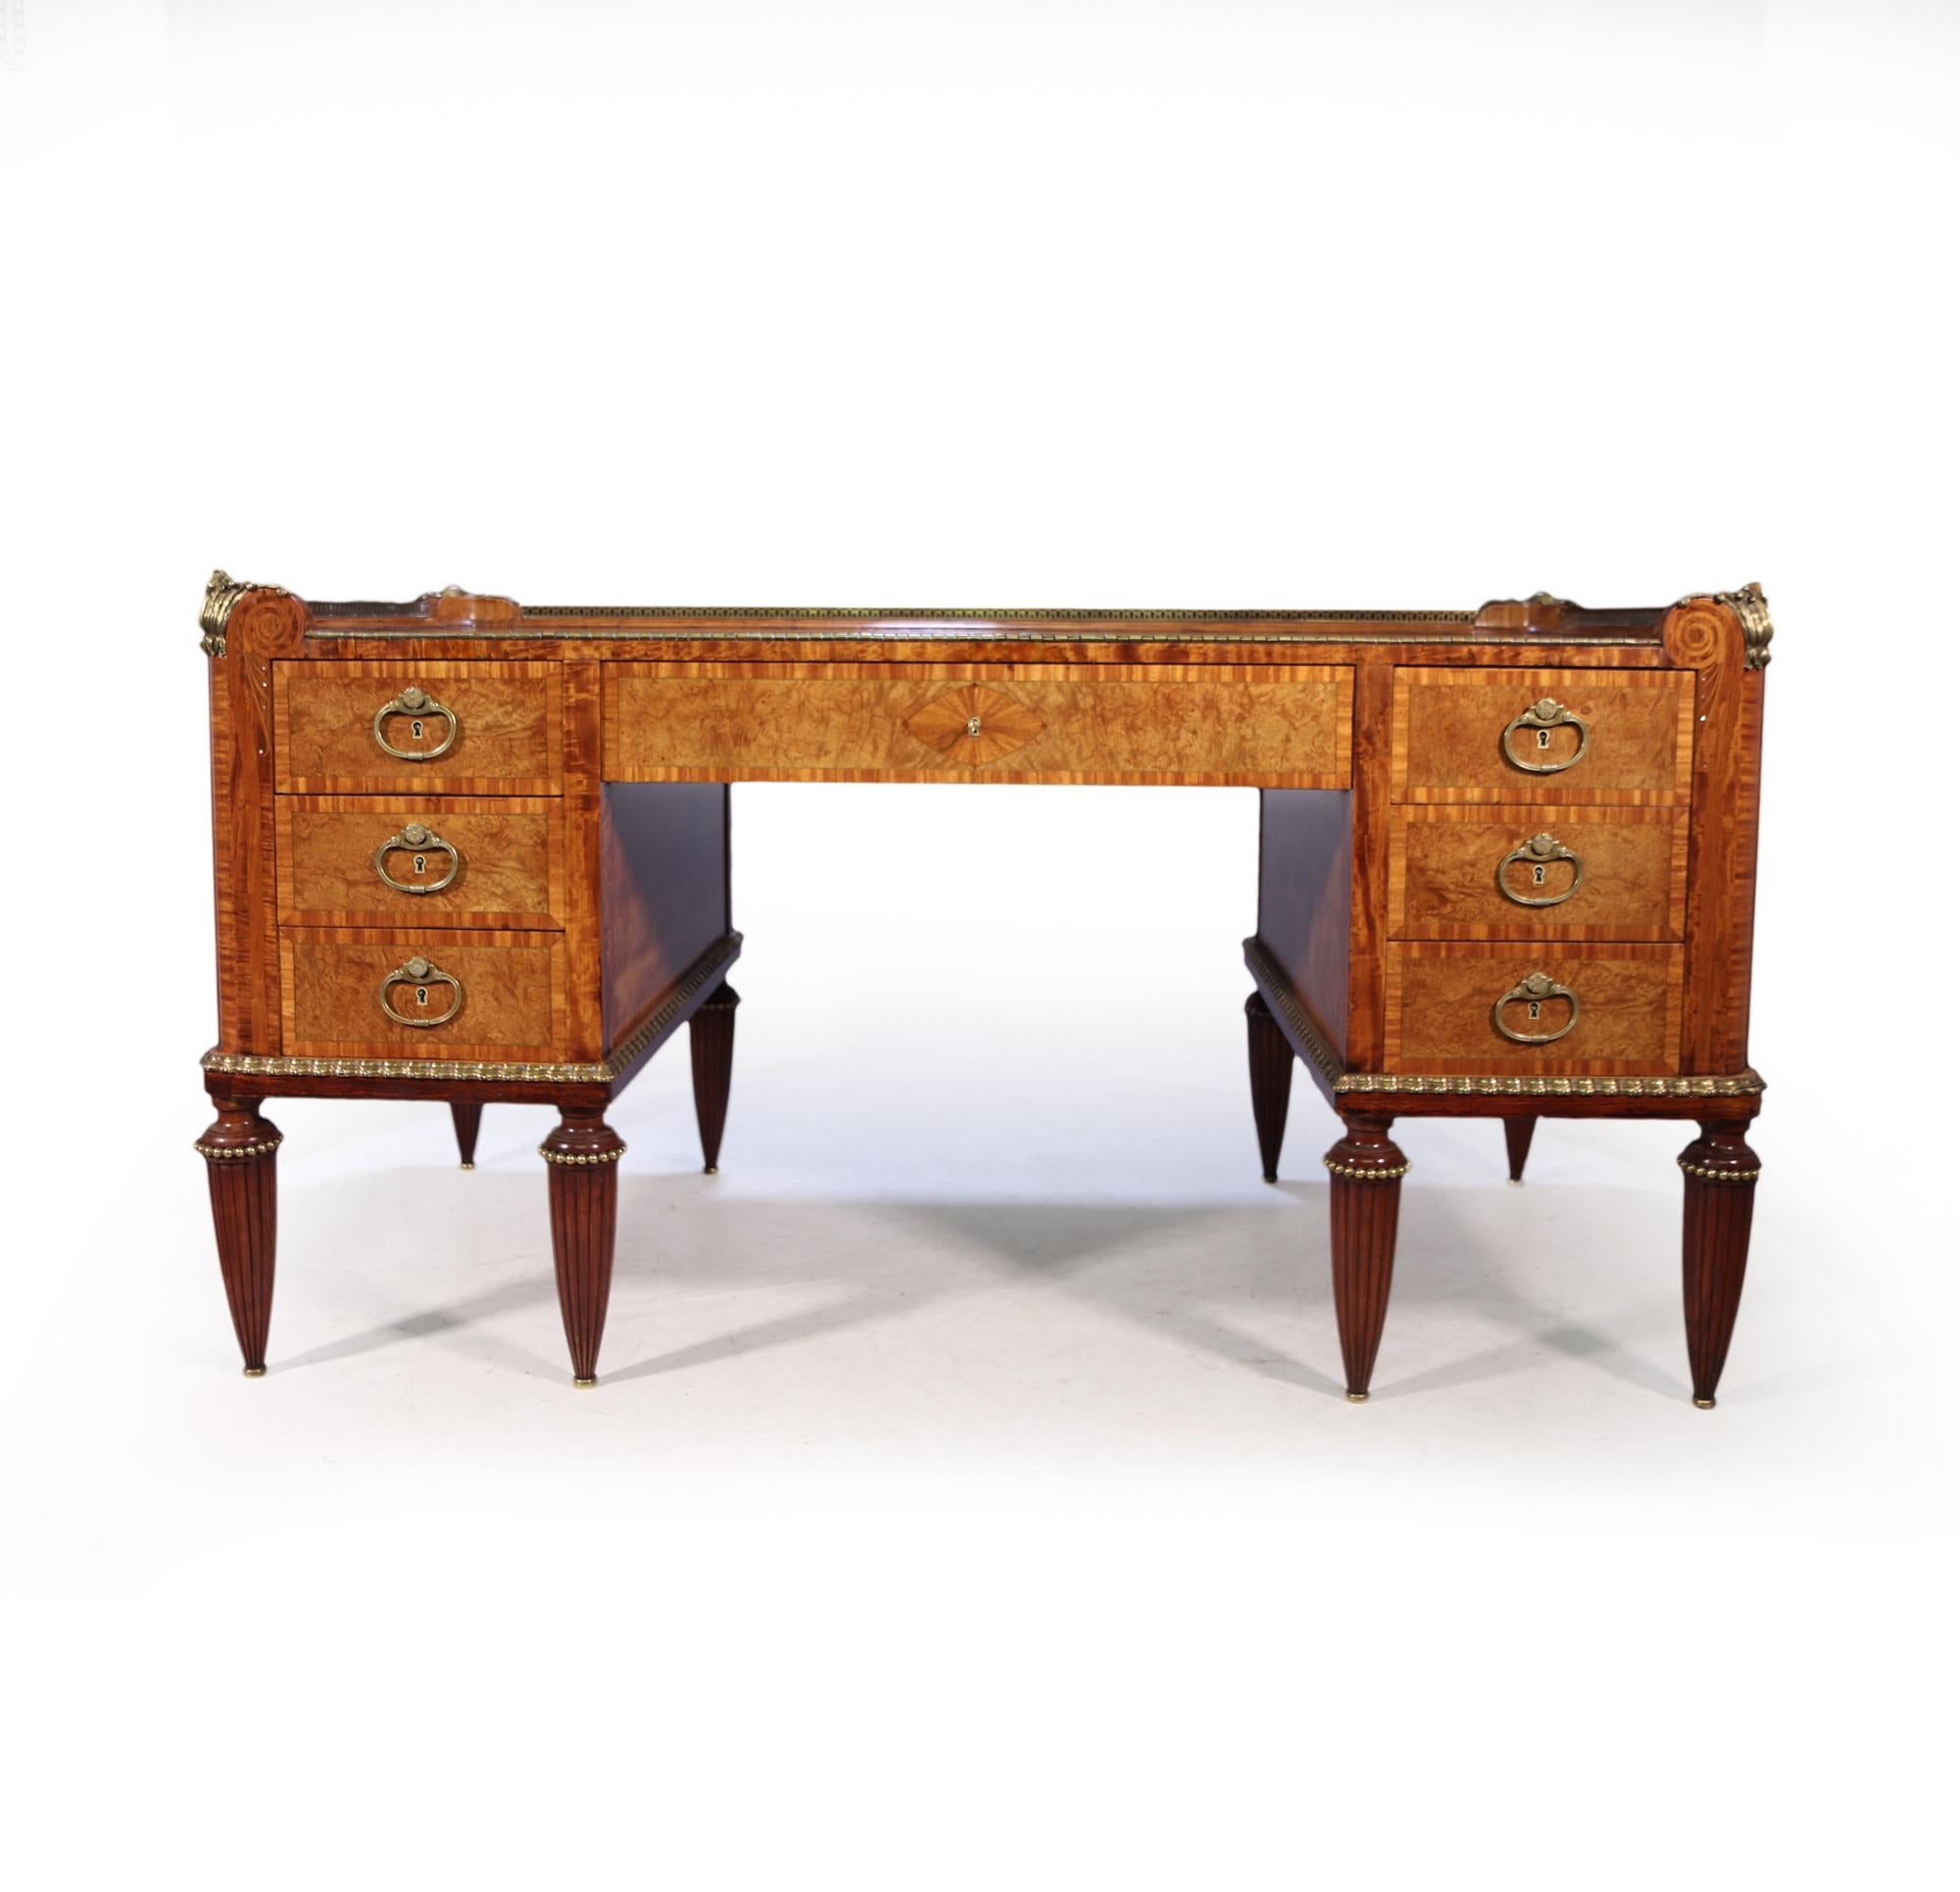 Early 20th Century French Art Deco Desk by Dufrene